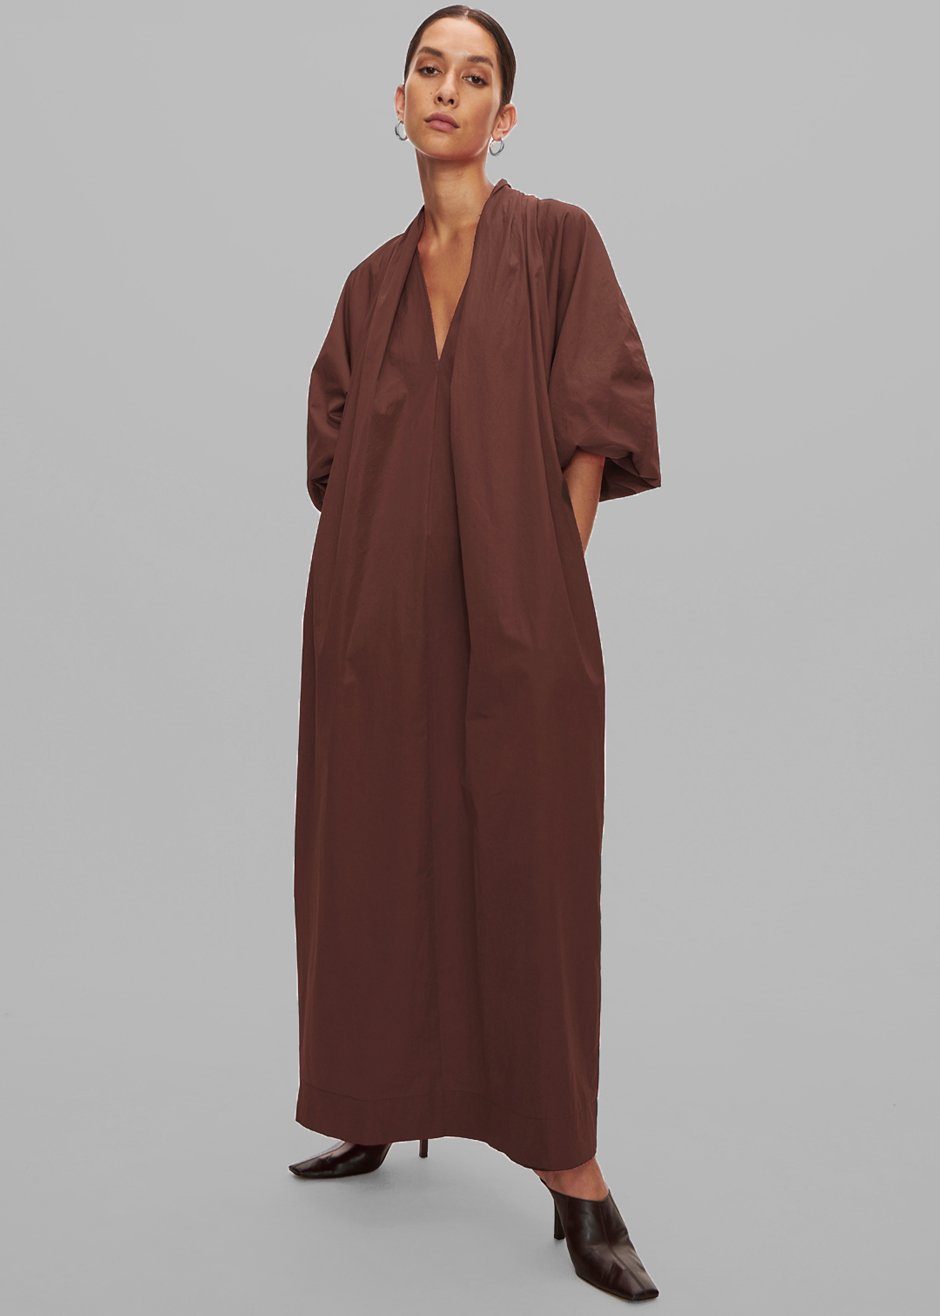 Esse Studios Collected Long Dress - Chocolate